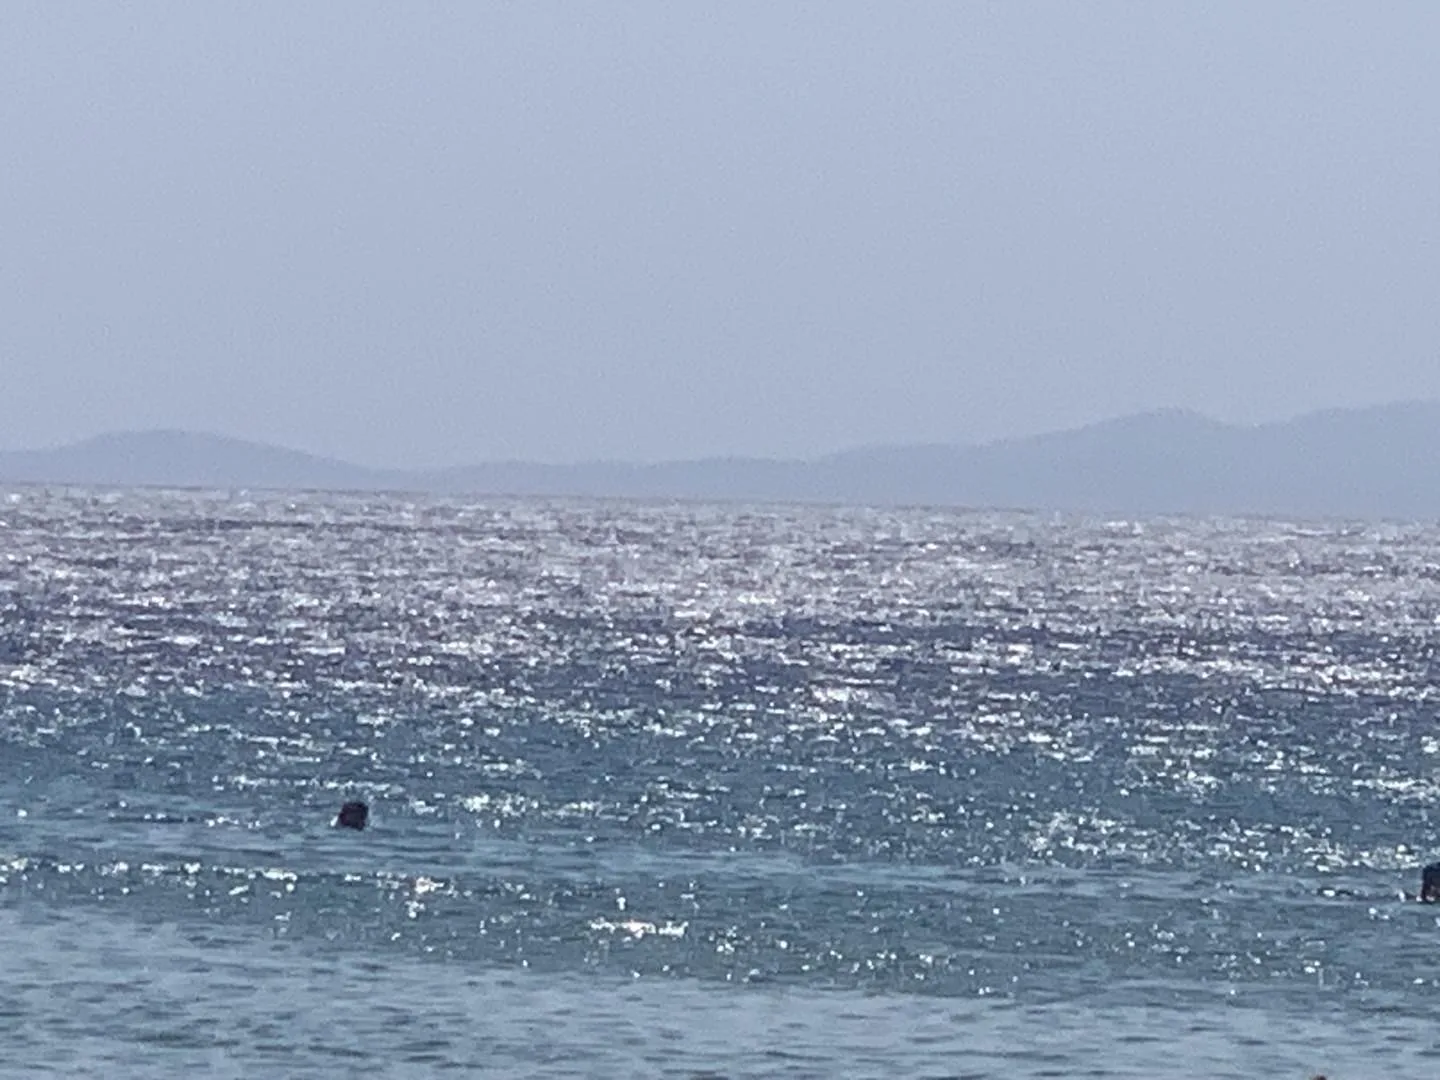 Photo by Babis Hatzidakis on August 20 2023. May be an image of grey whale humpback whale whale dolphin surfboard water and ocean jpg